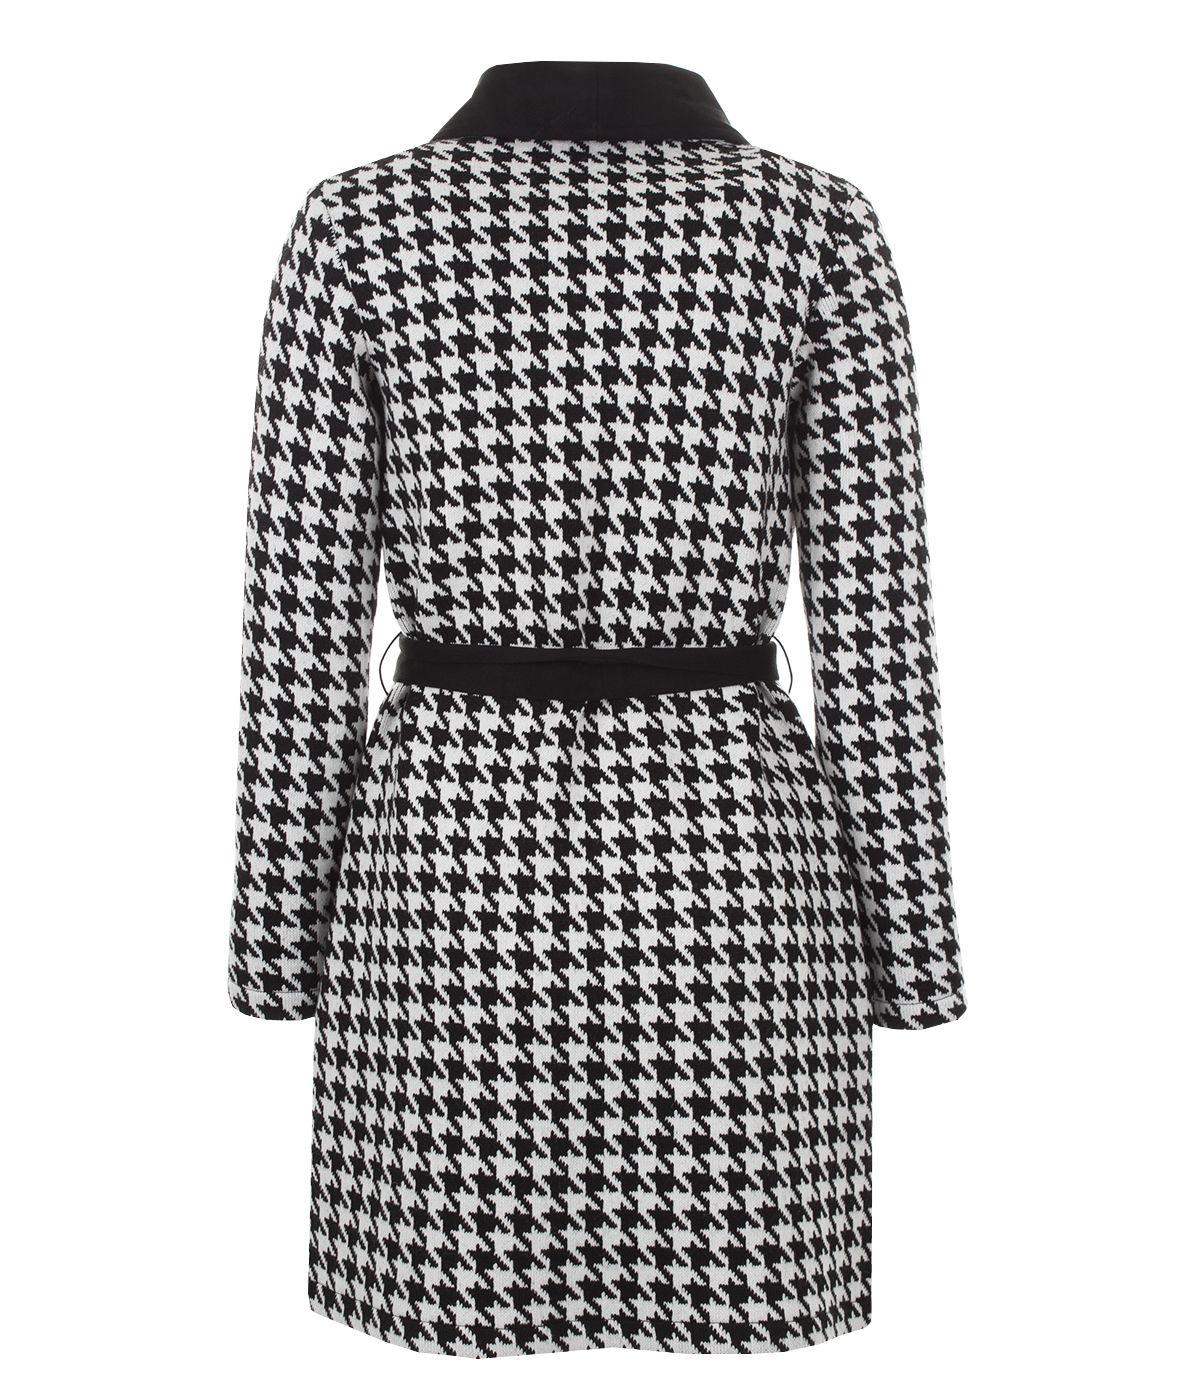 Acrylic wrap-around jacket with contrasting belt and lapel and houndstooth print 1